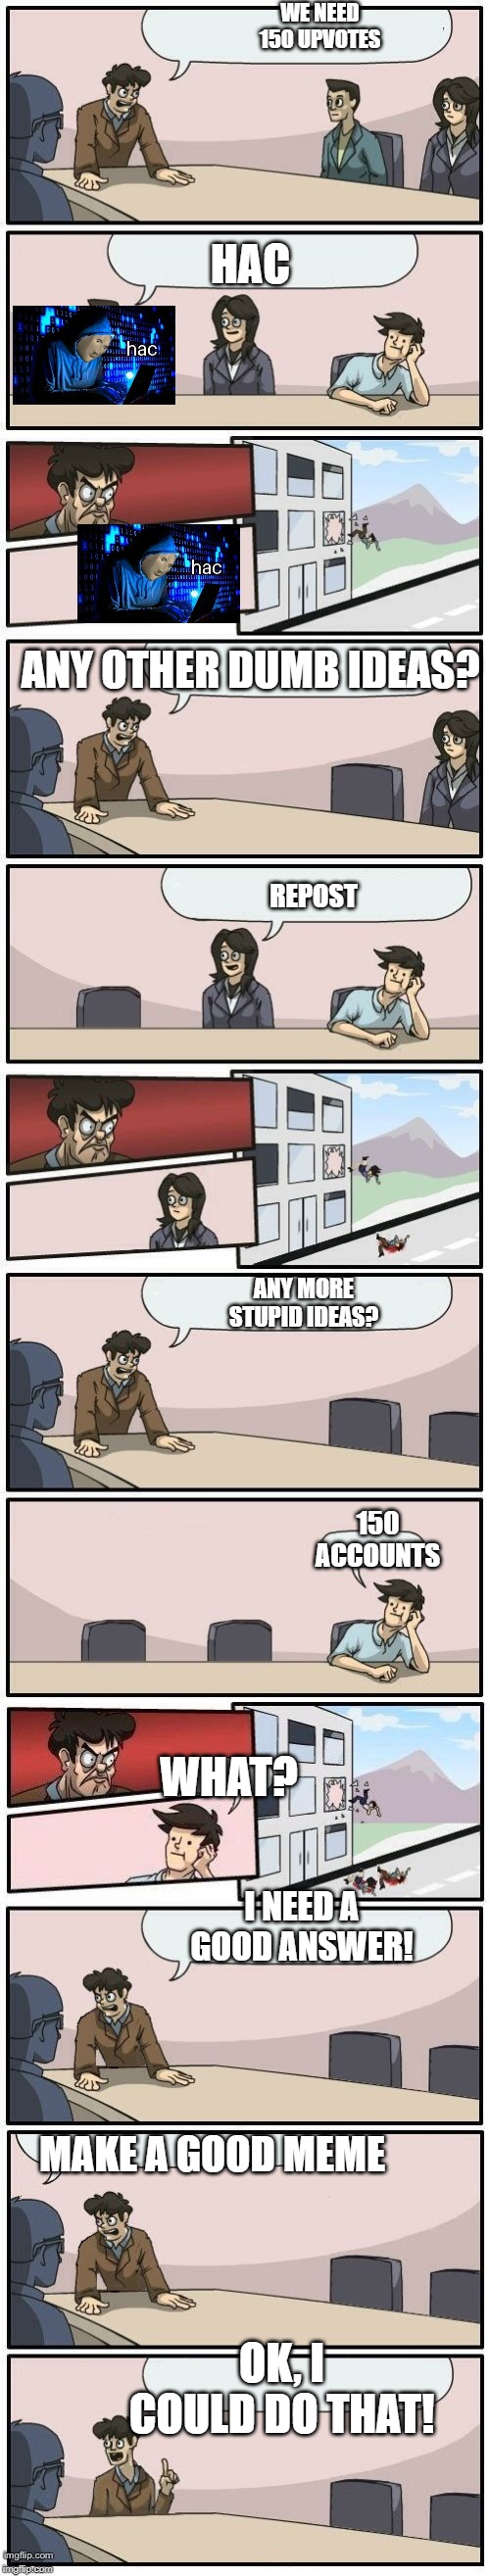 Boardroom Meeting Suggestions Extended | WE NEED 150 UPVOTES HAC ANY OTHER DUMB IDEAS? REPOST ANY MORE STUPID IDEAS? 150 ACCOUNTS WHAT? I NEED A GOOD ANSWER! MAKE A GOOD MEME OK, I  | image tagged in boardroom meeting suggestions extended | made w/ Imgflip meme maker